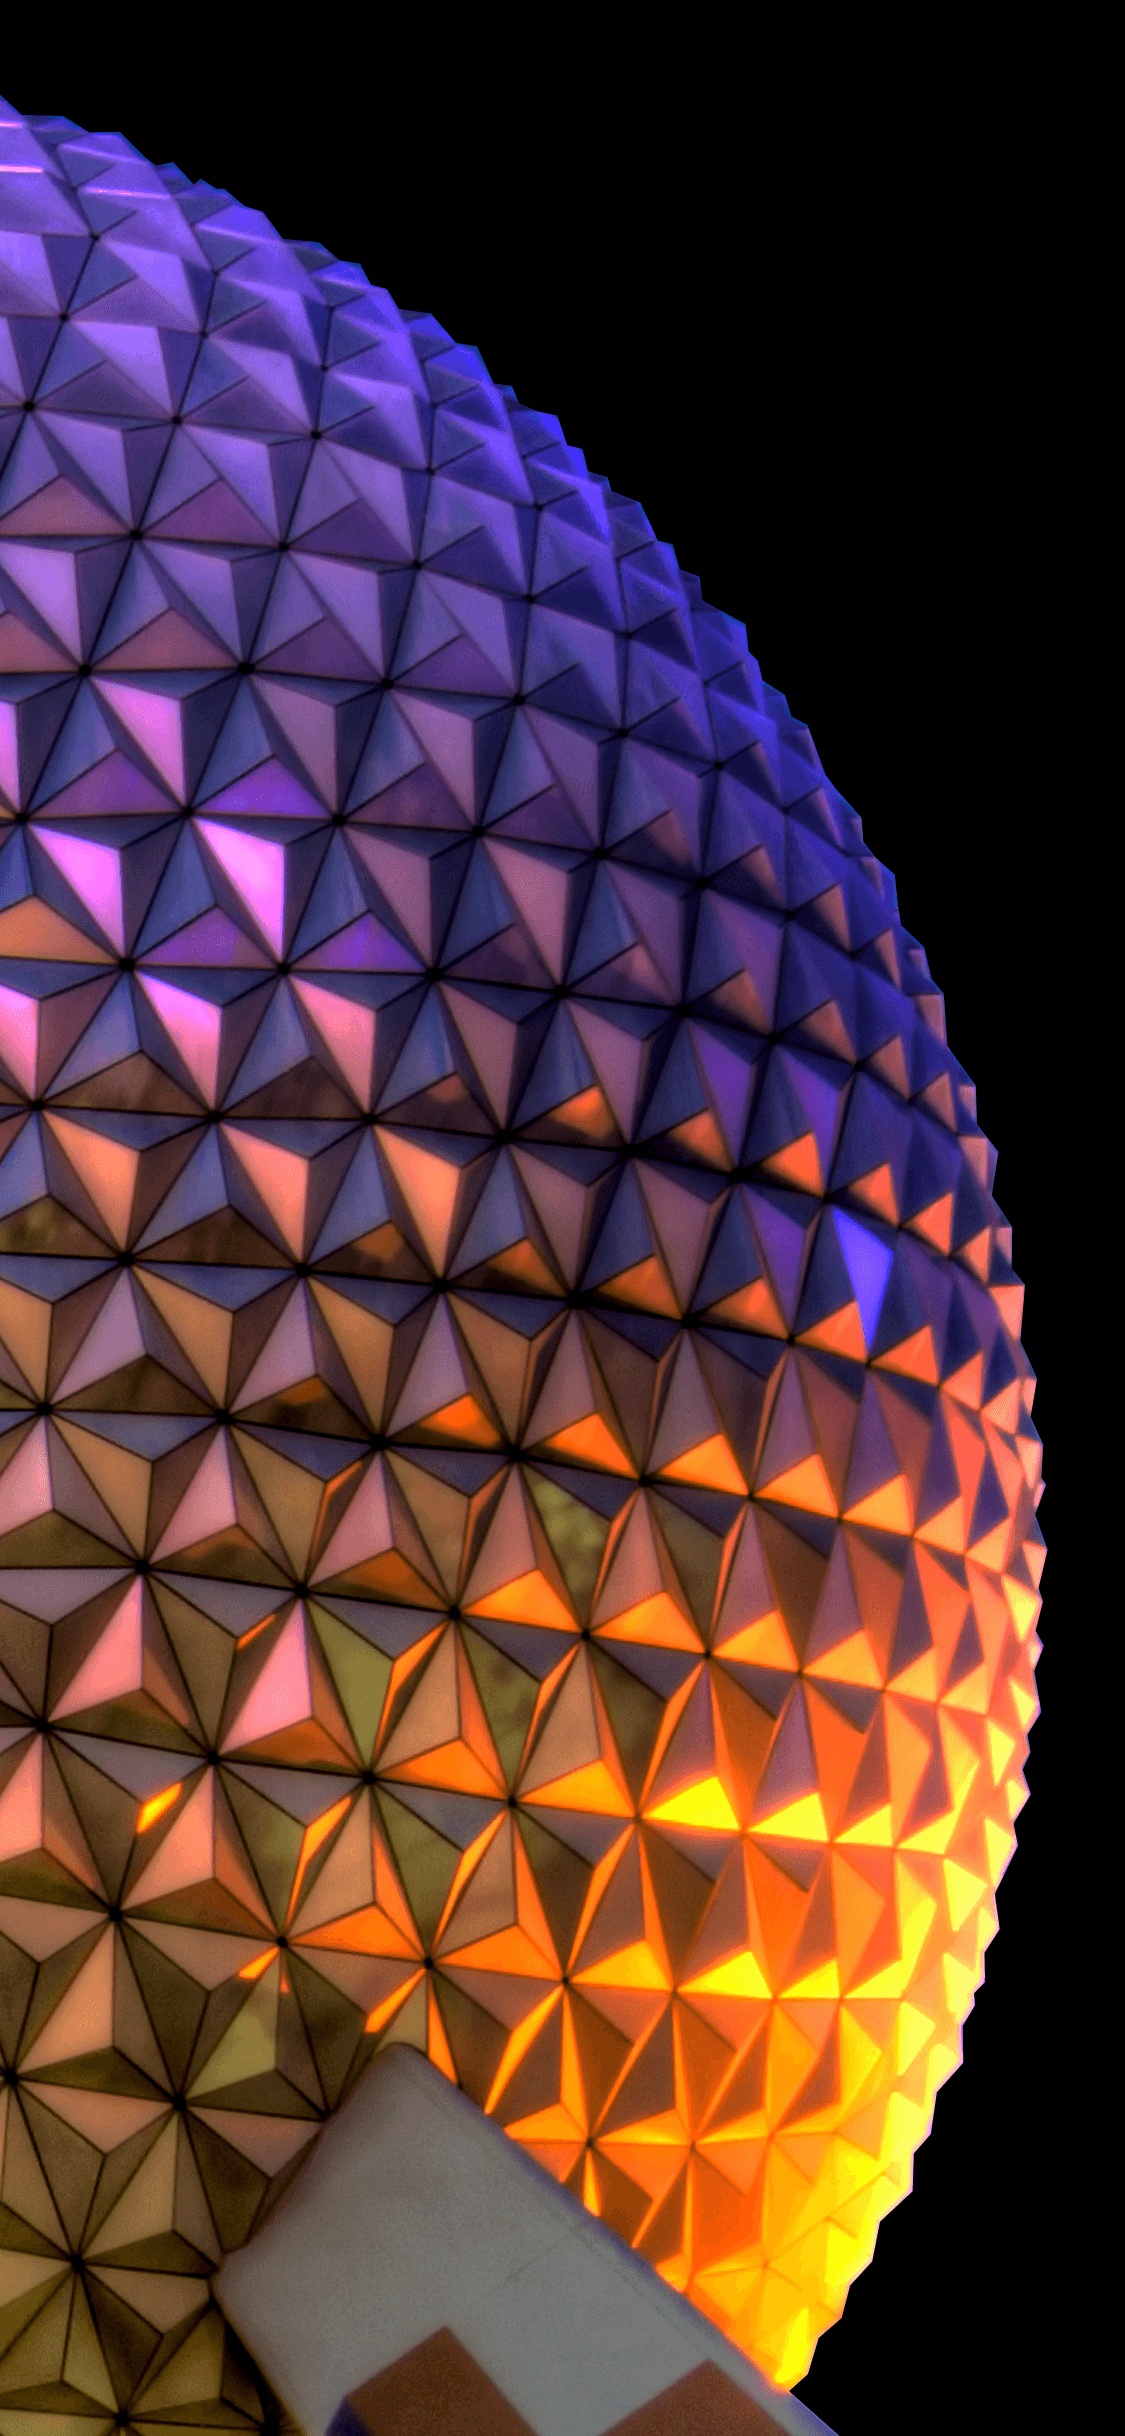 Spaceship Earth. Inspired by new iPhone wallpaper. 1125 × 2436